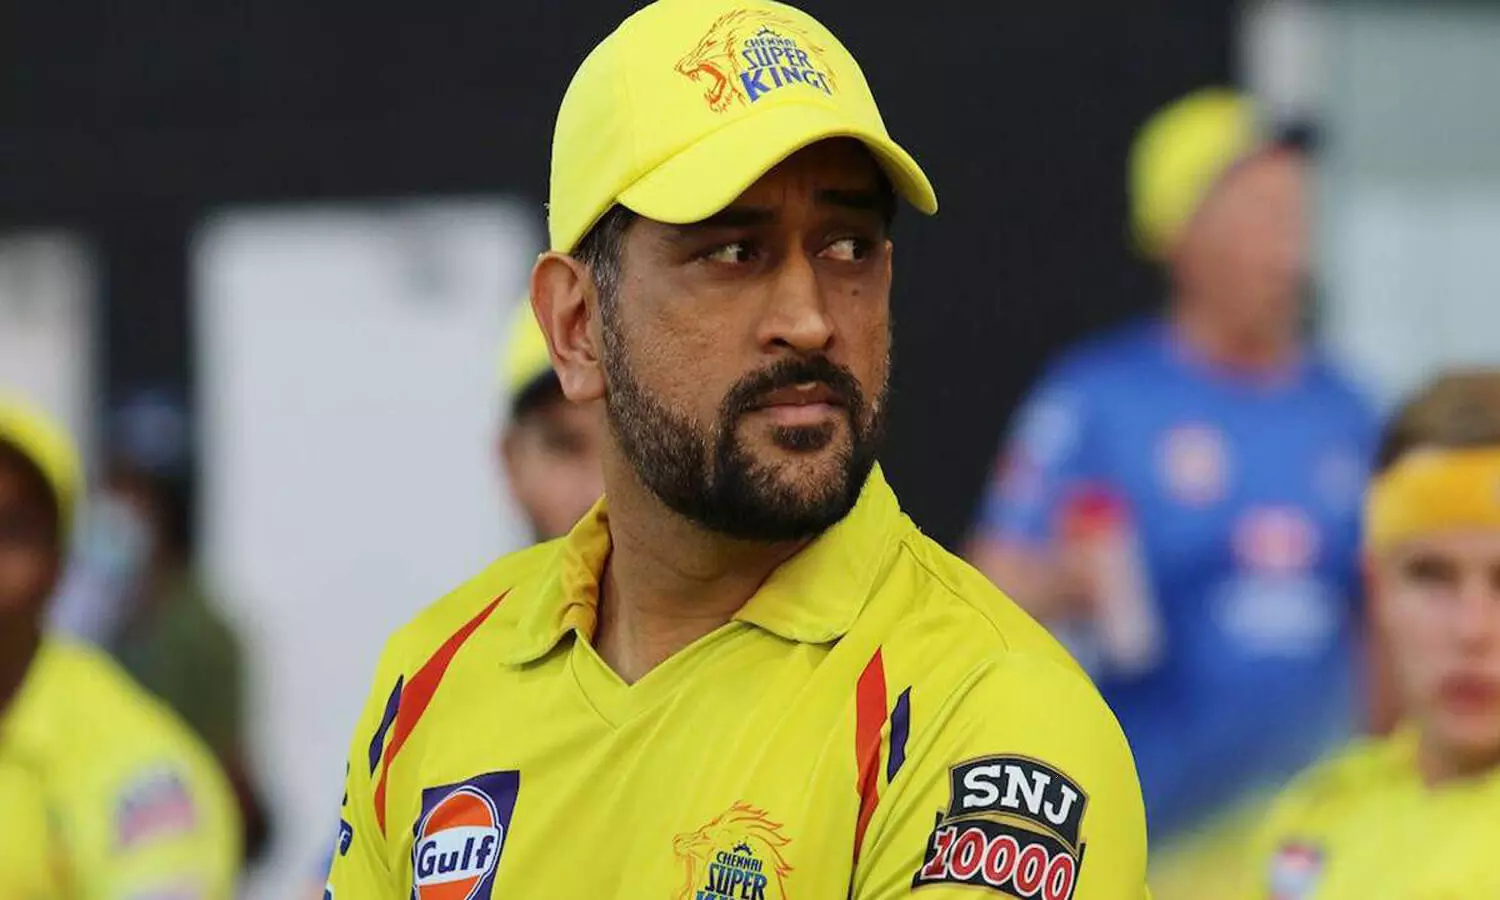 Dhoni plays THIS sport 15 times more than cricket, reveals Harbhajan